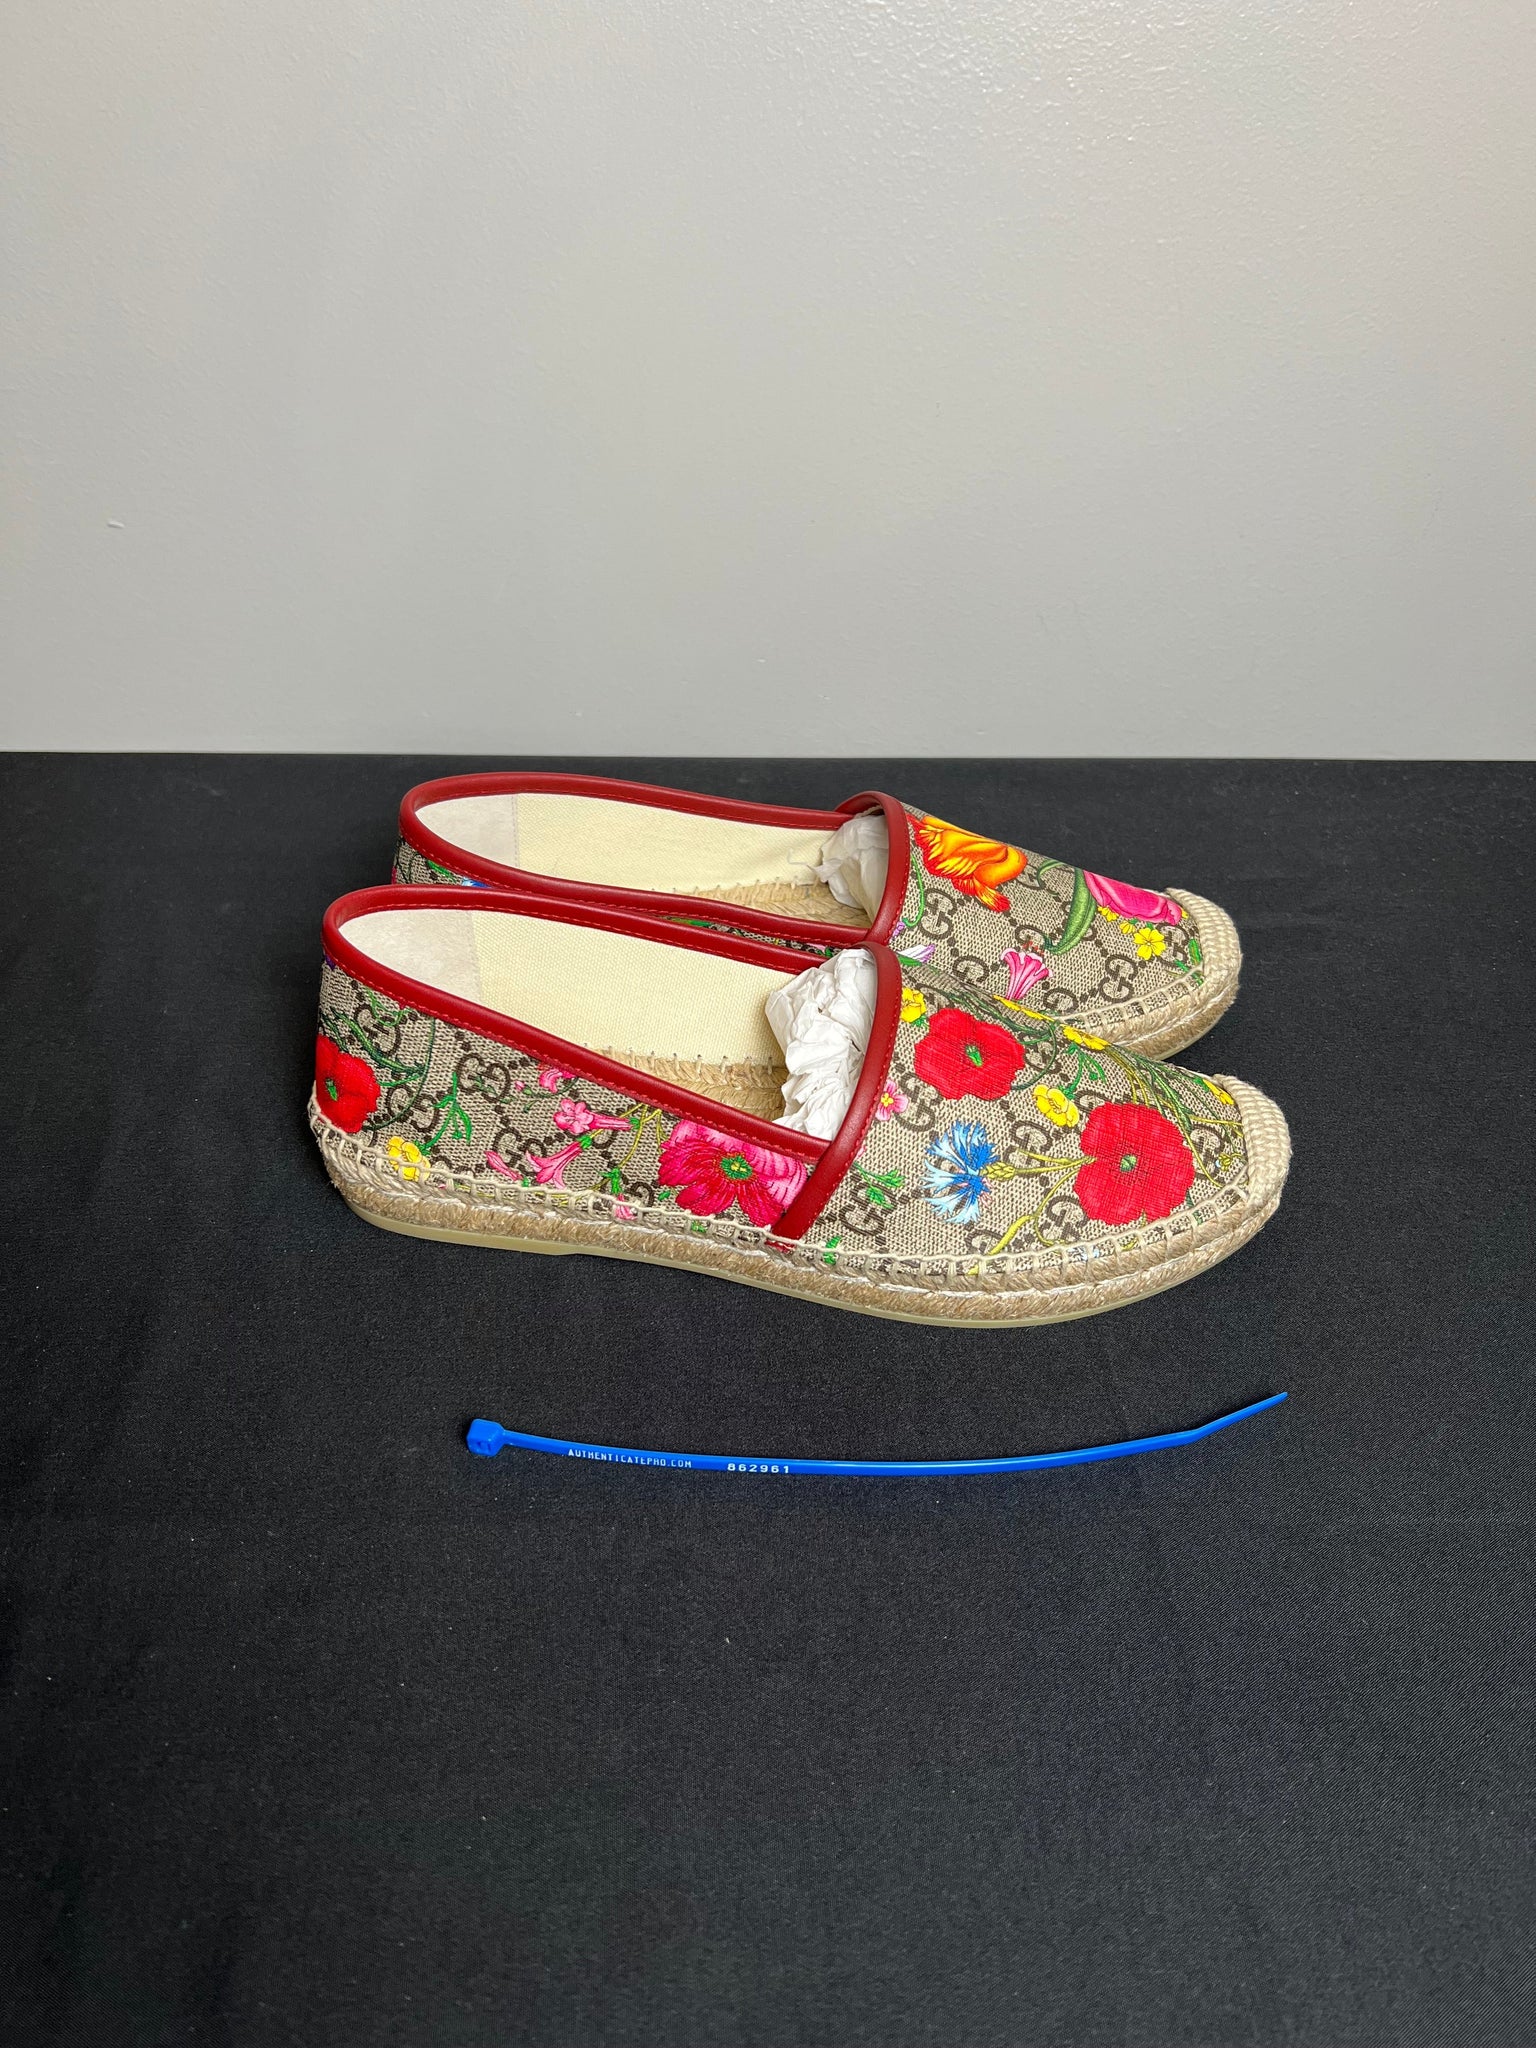 Shoes Flats Espadrille By Gucci Size: 8 – Madria Shop